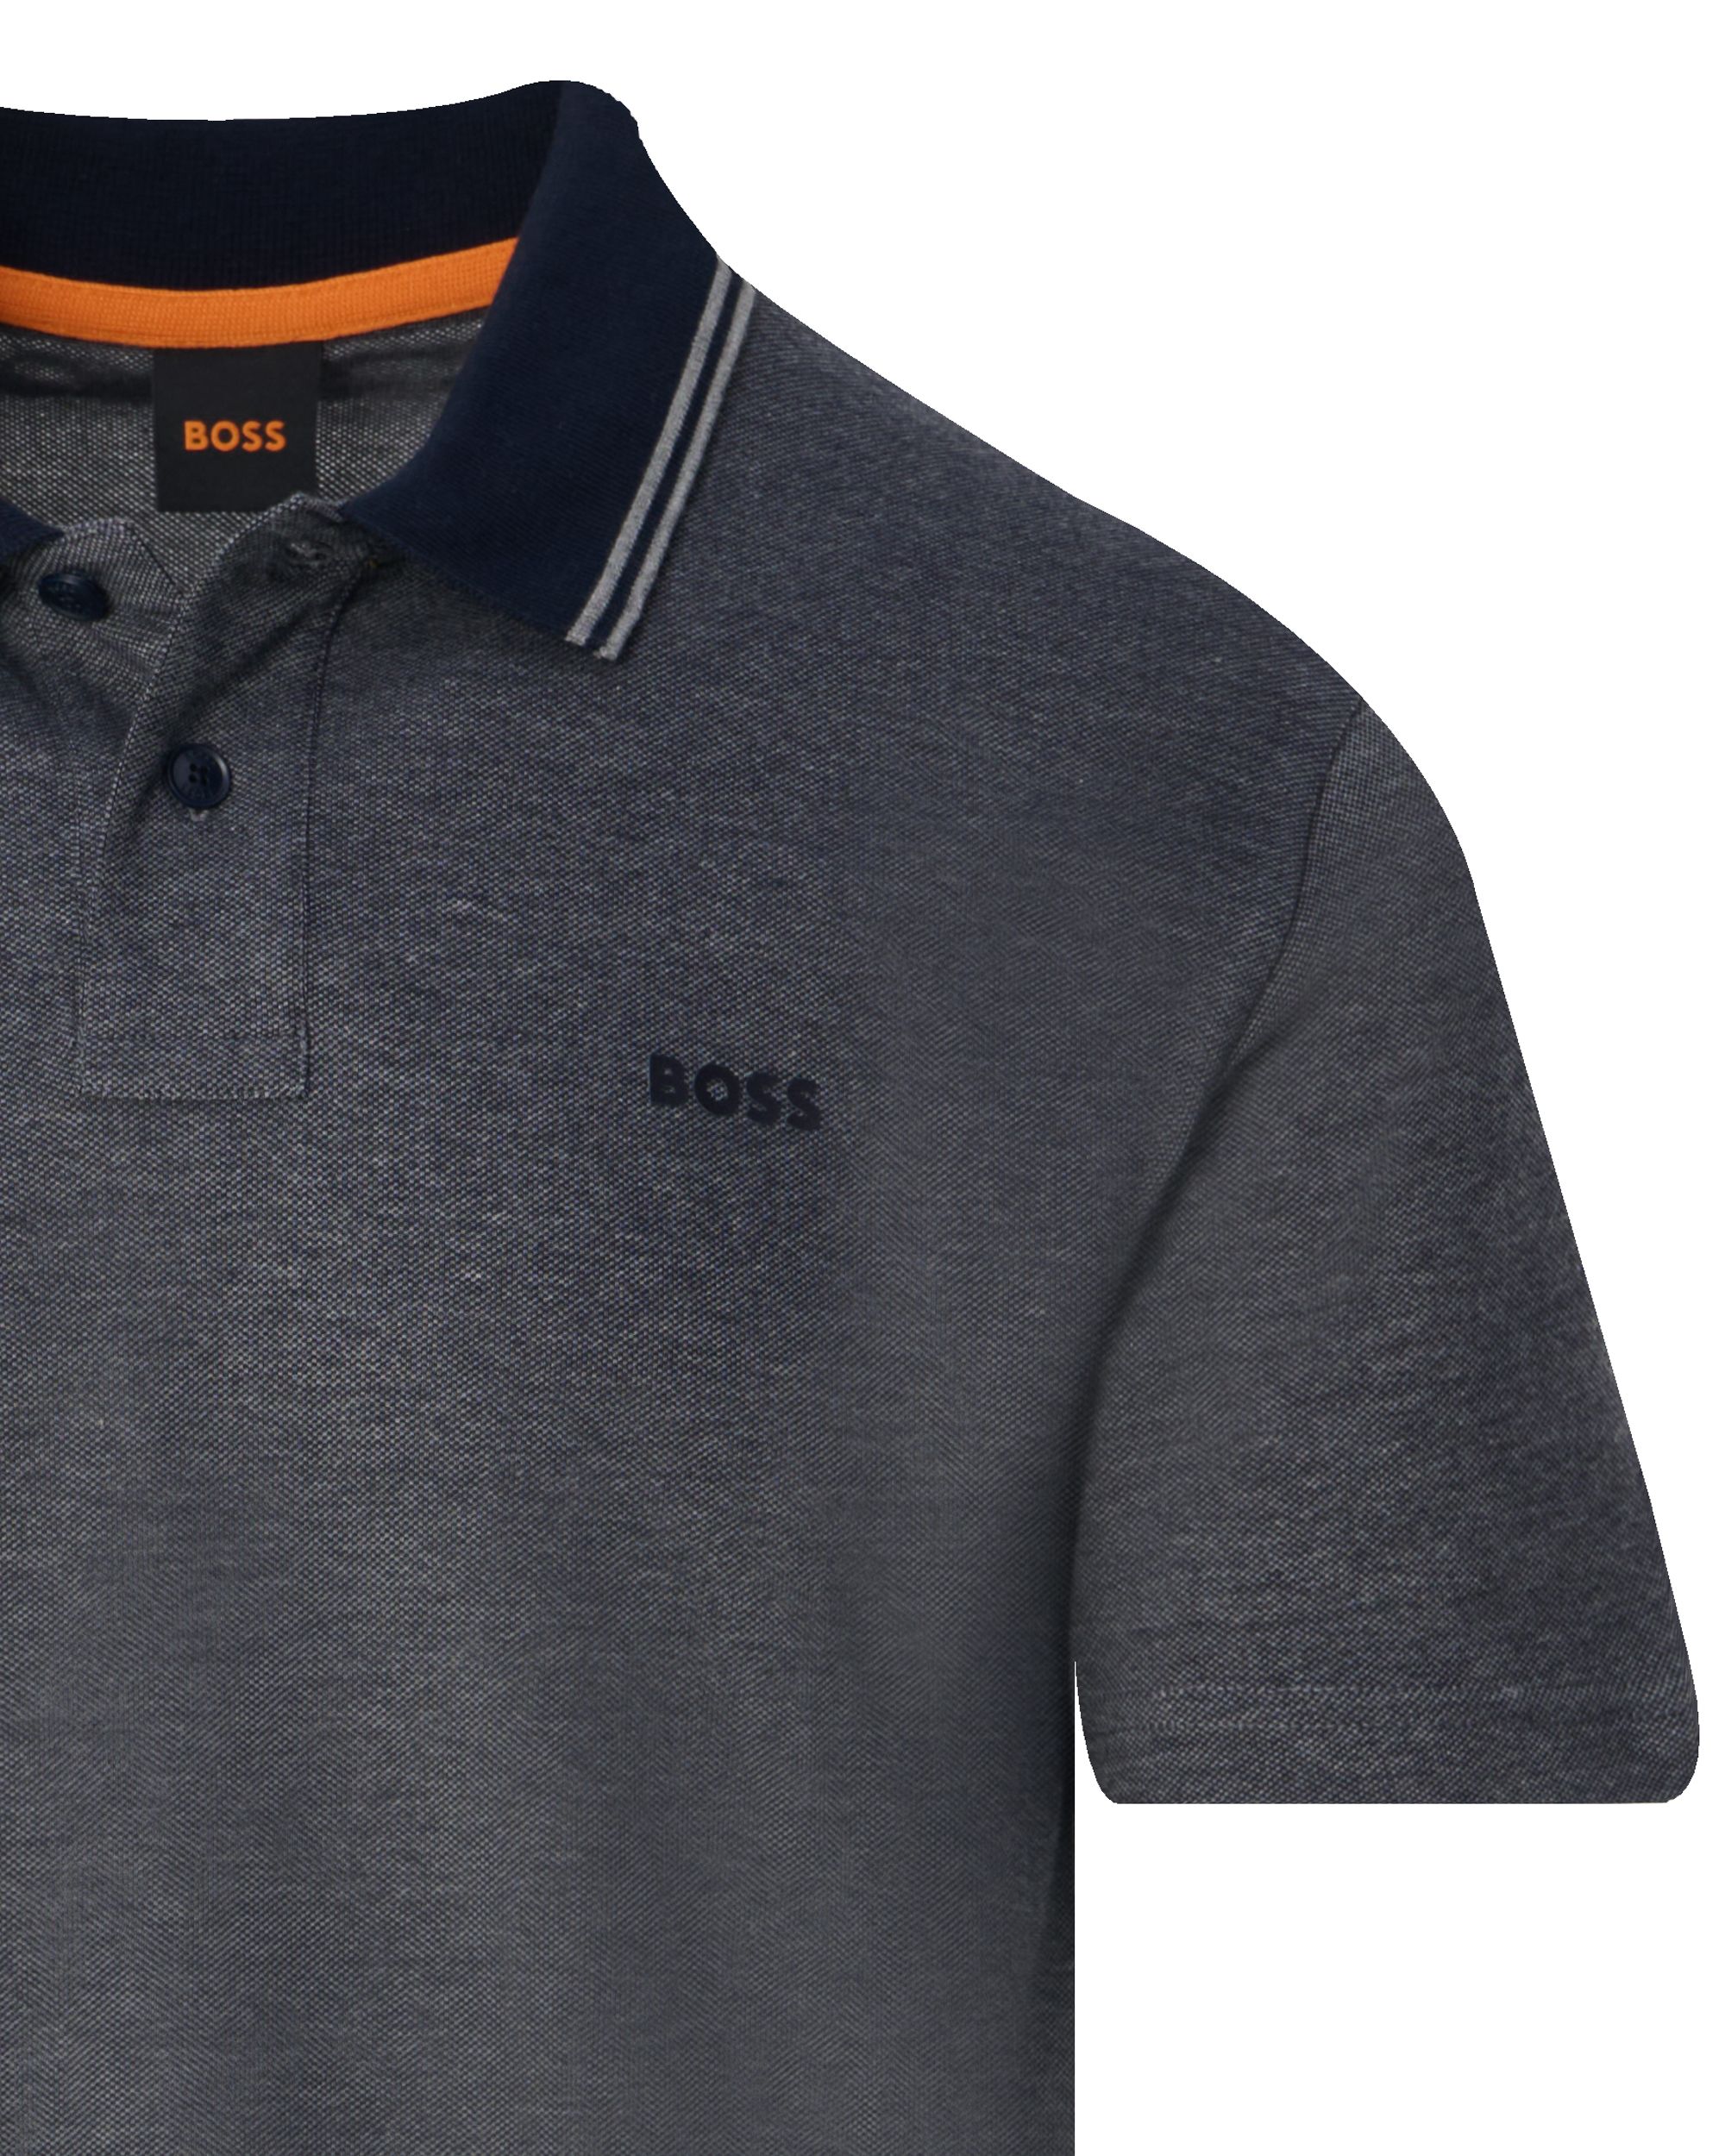 Boss Casual Peoxford Polo KM Donker blauw 094563-001-L